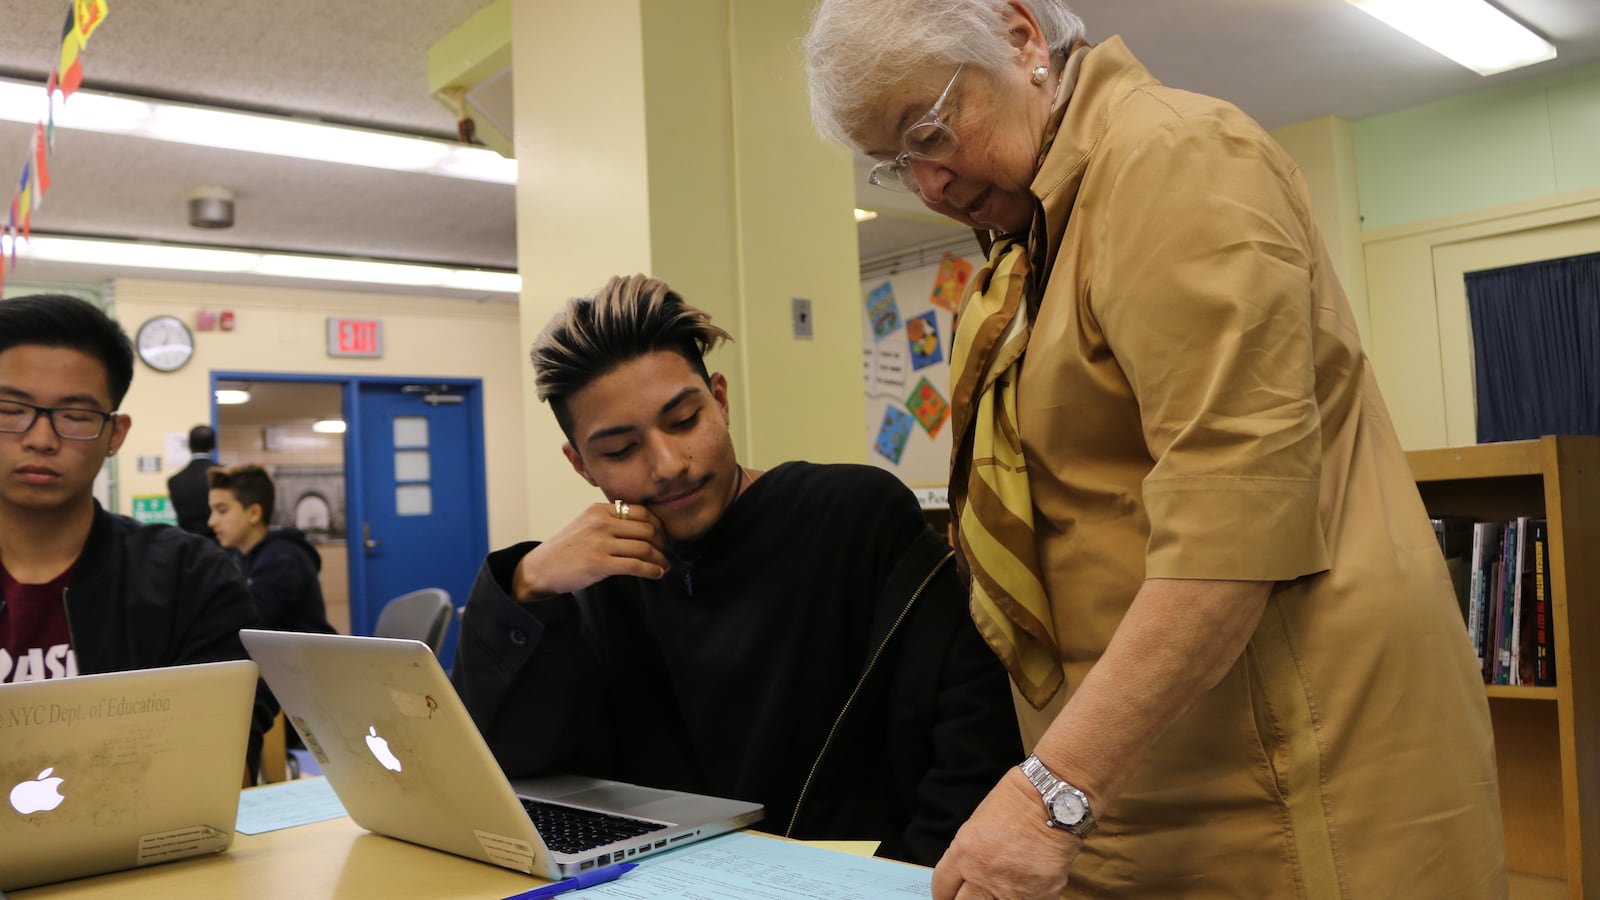 Schools Chancellor Carmen Fariña spoke with Bryant Ramirez about his college plans at Pace High School on Monday.